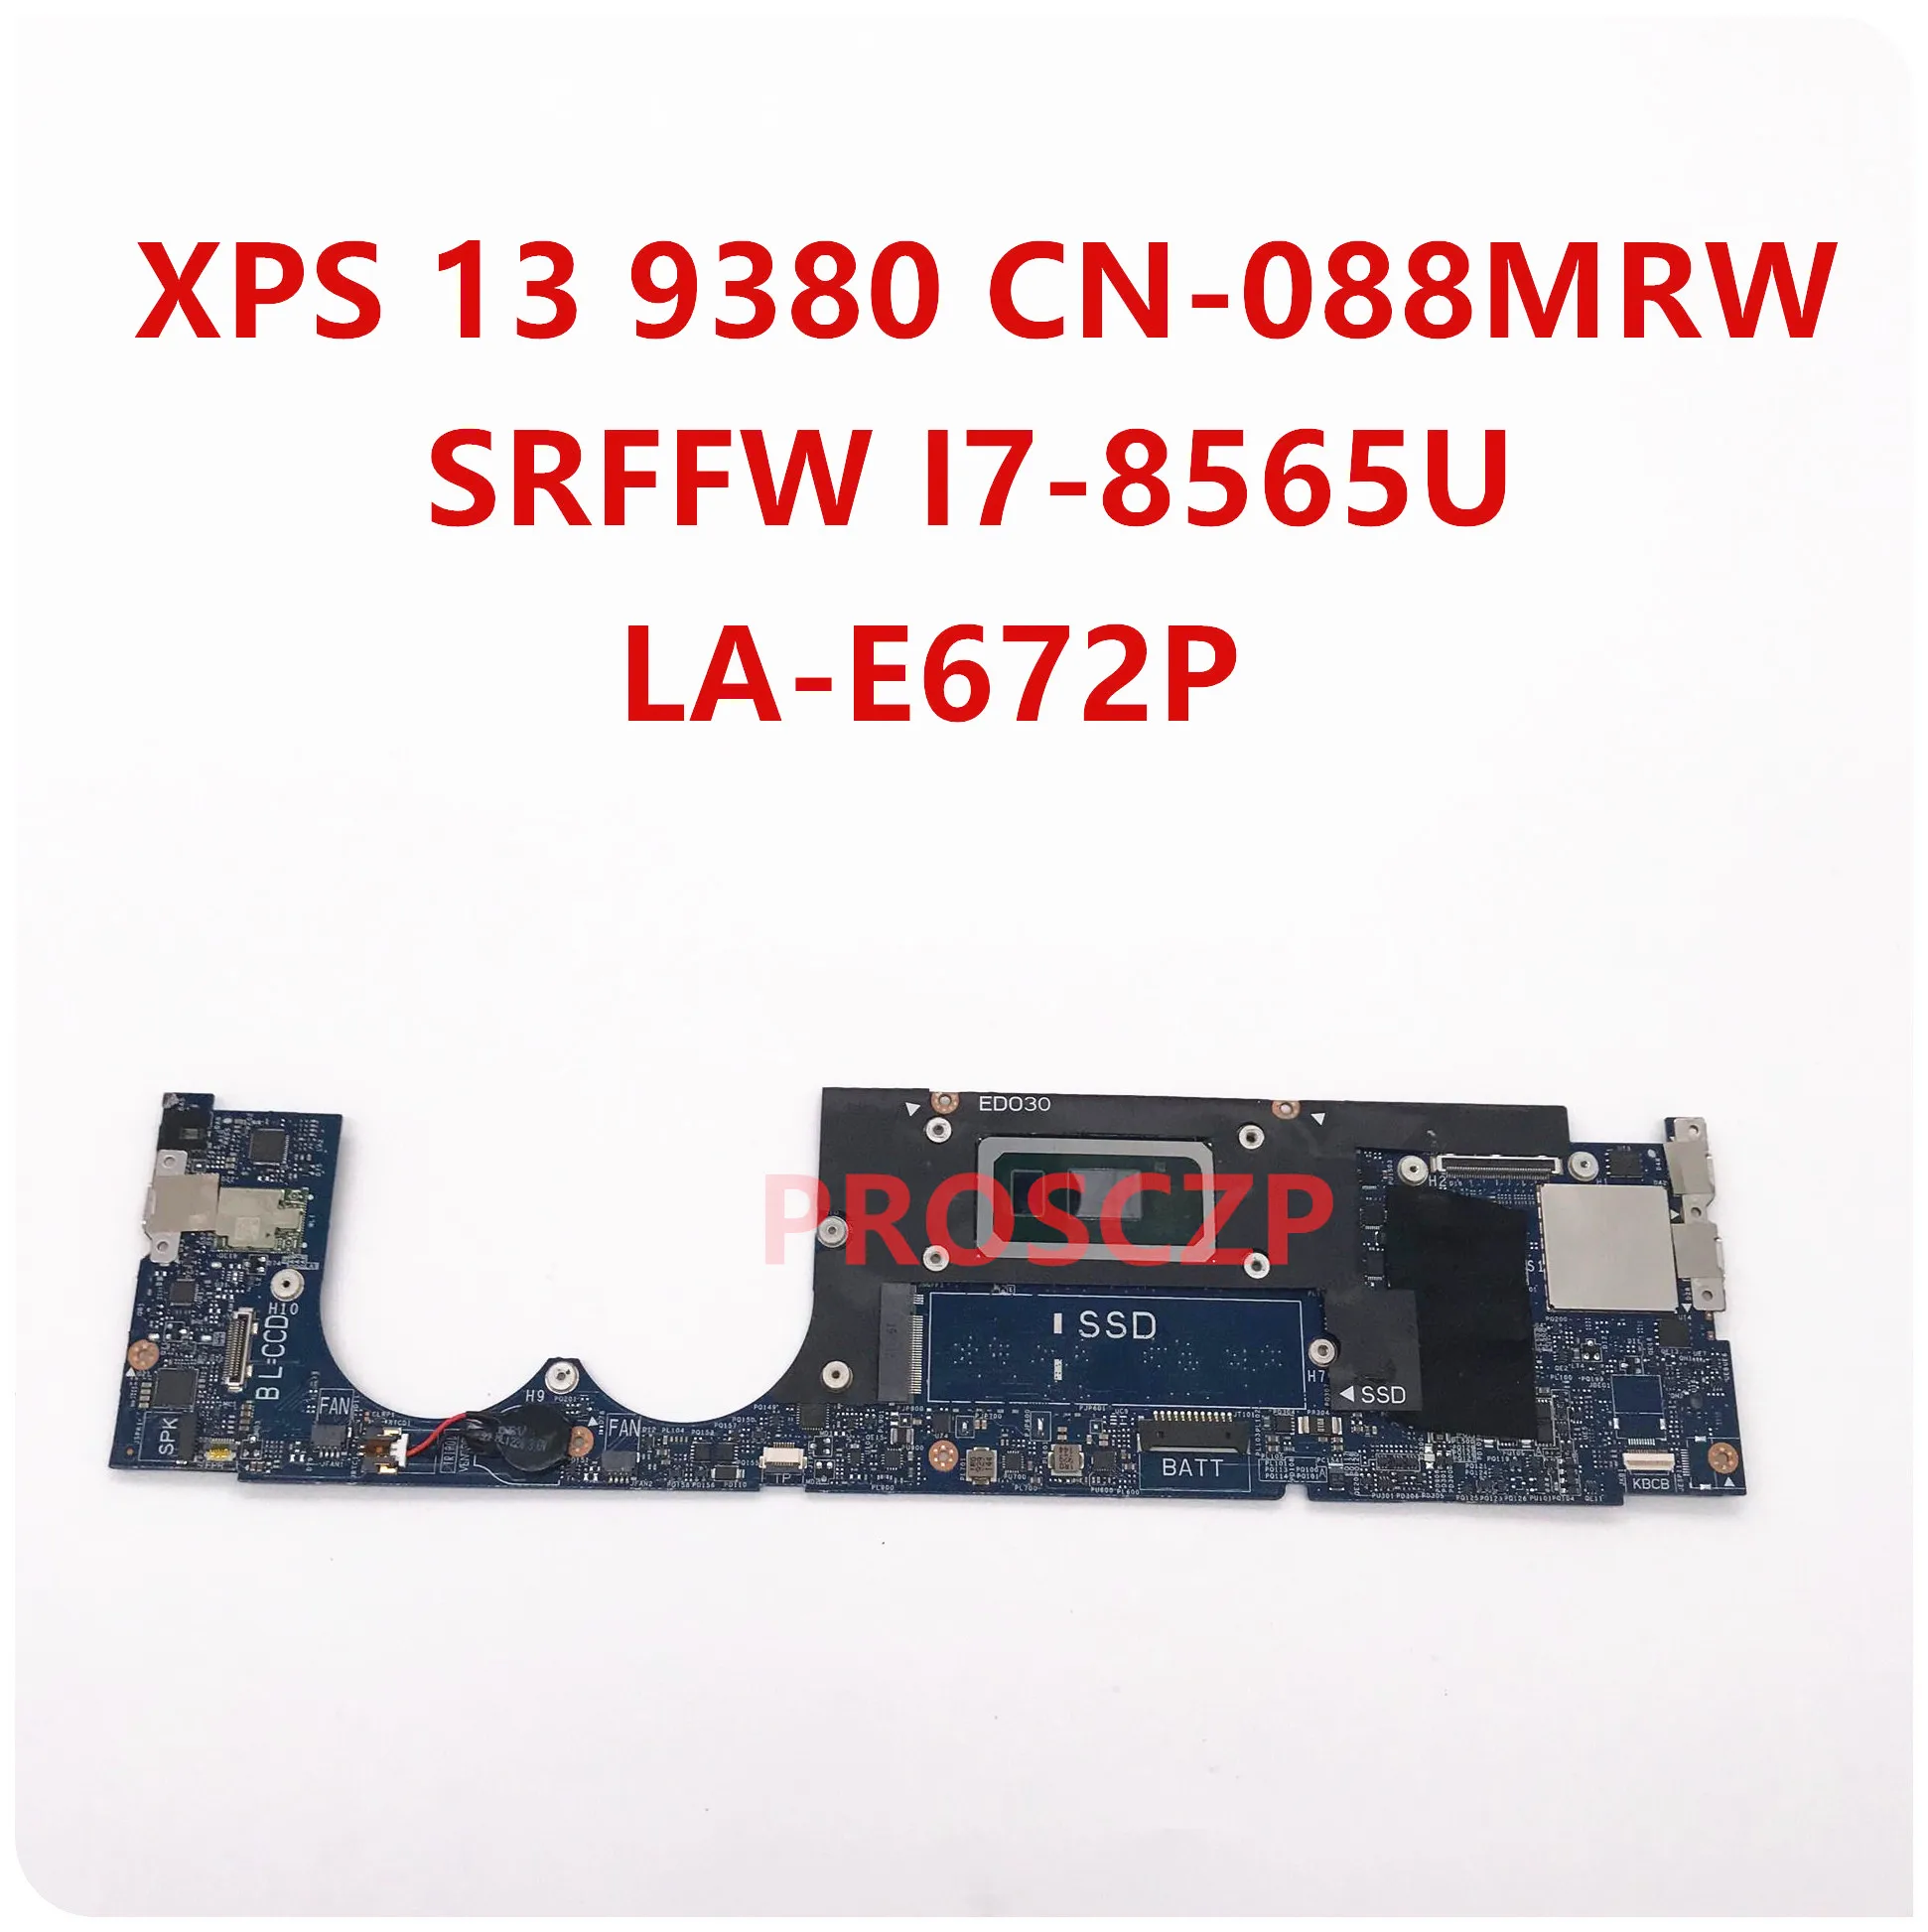 

Mainboard FOR DELL XPS 13 9380 Laptop Motherboard CN-088MRW 088MRW 88MRW LA-E672P With SRFFW I7-8565U CPU 100% Working Well